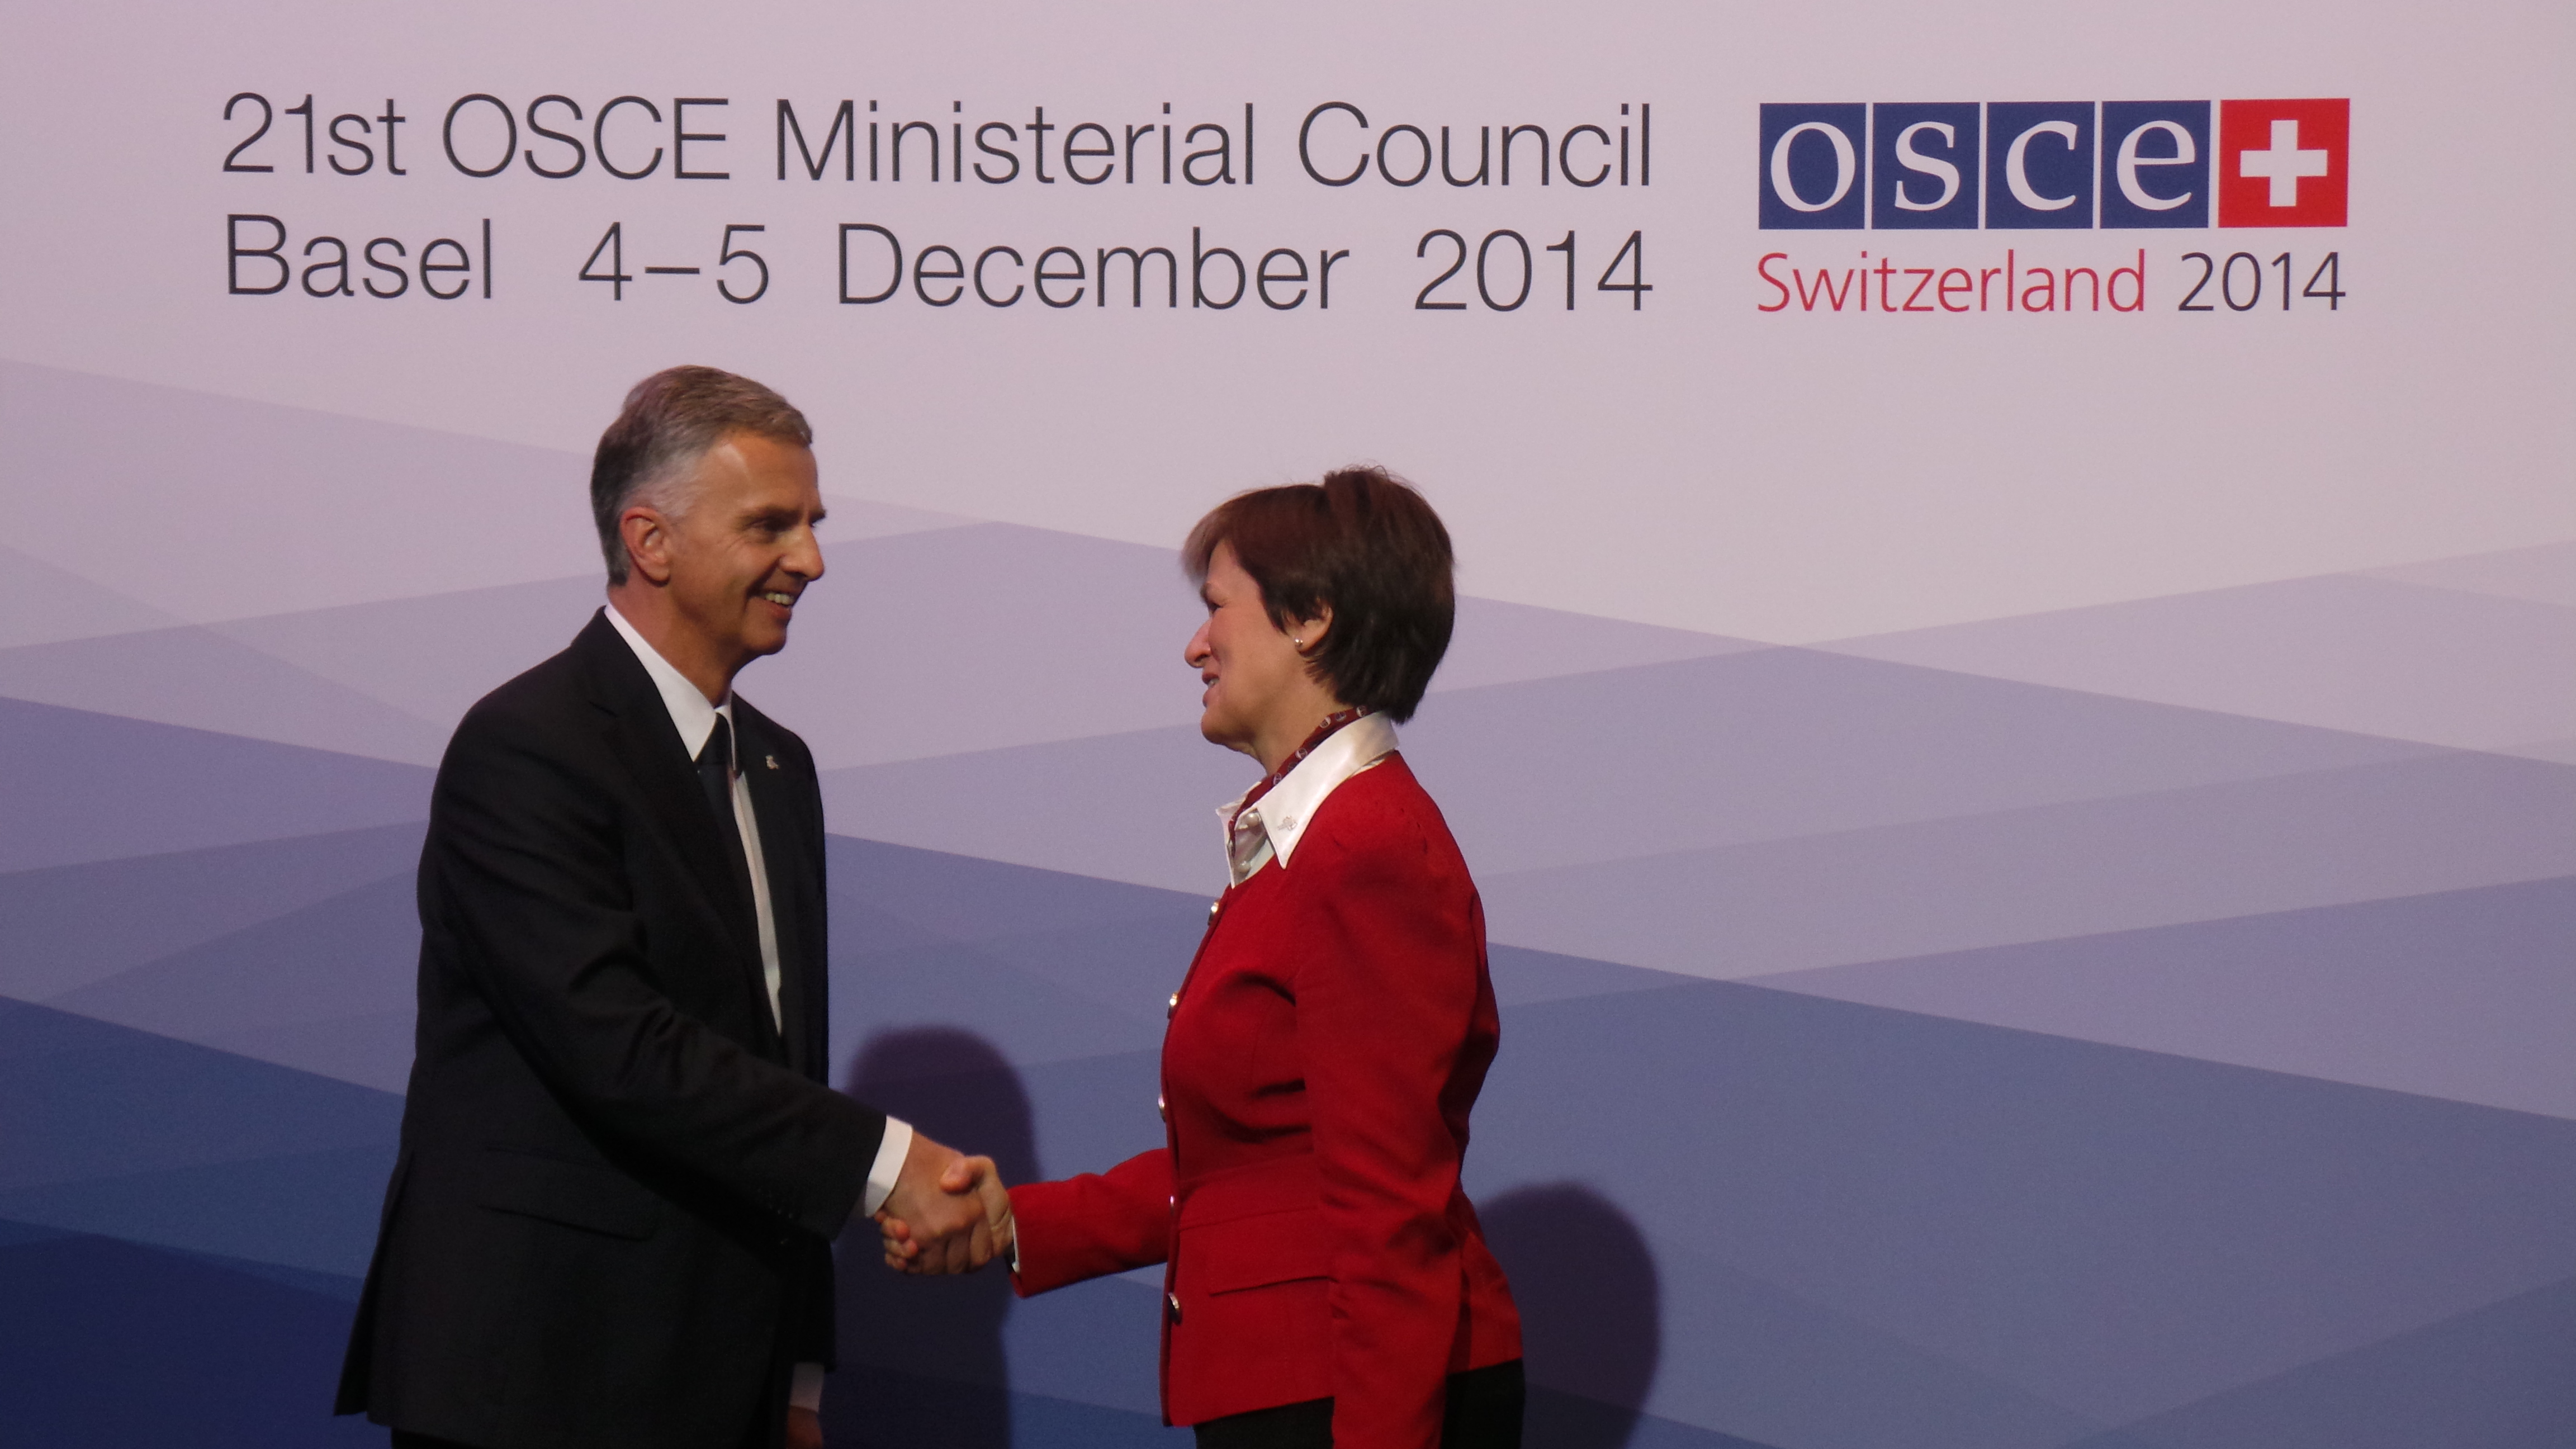 The President of the Swiss Confederation, Didier Burkhalter, greets Astrid Thors, High Commissioner on National Minorities (HCNM) at the OSCE Ministerial Council 2014 in Basel